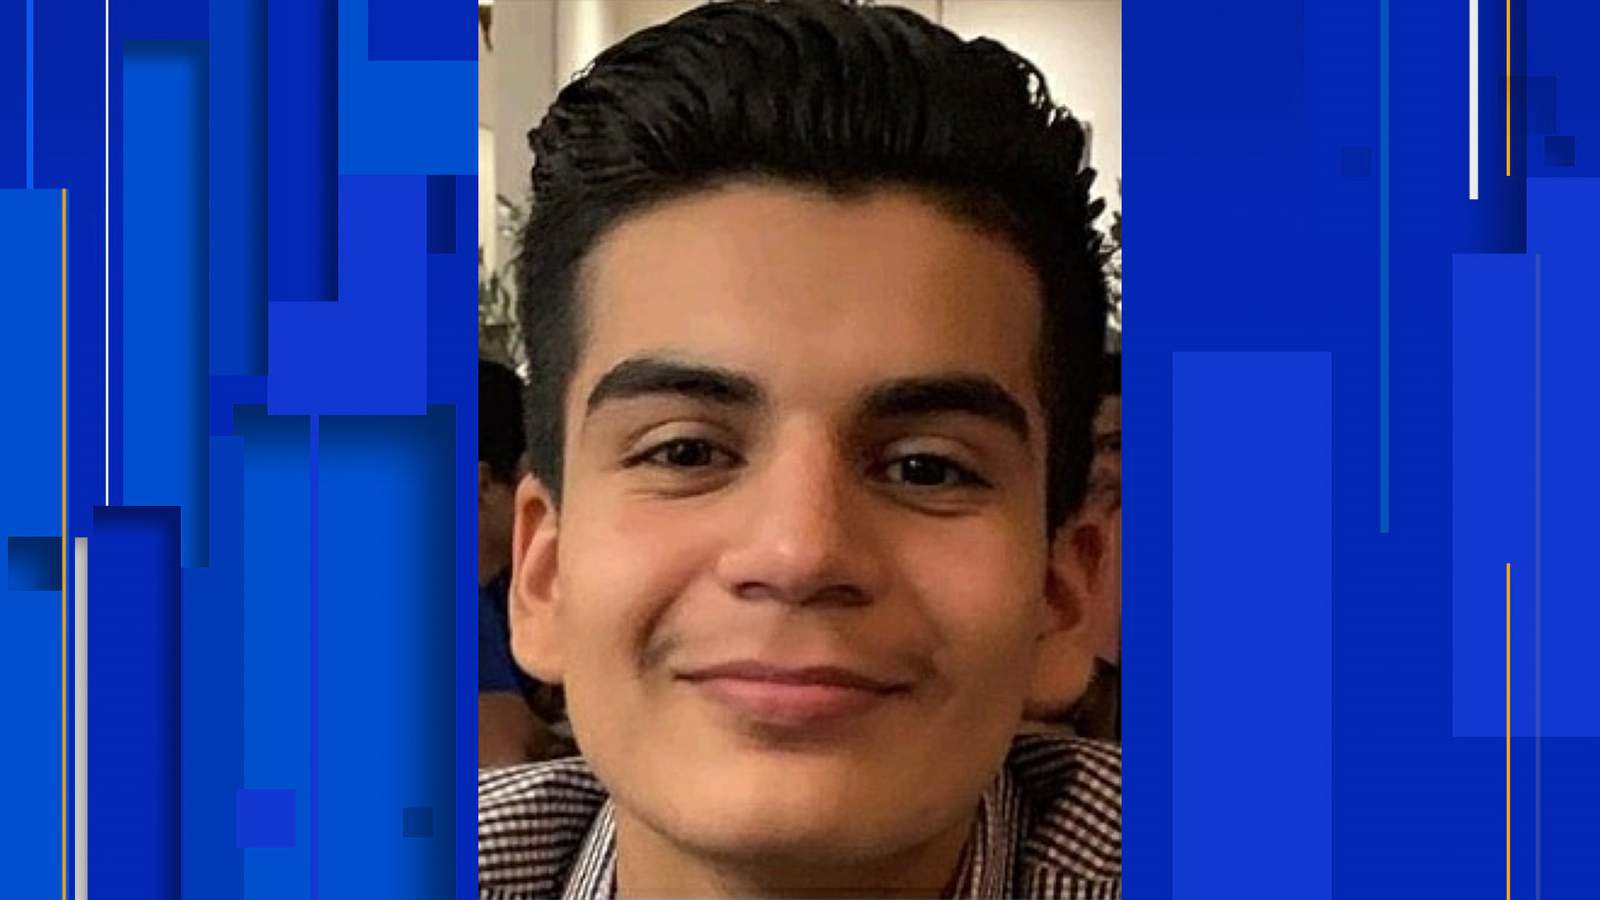 SAPD searching for 17-year-old who disappeared on West Side